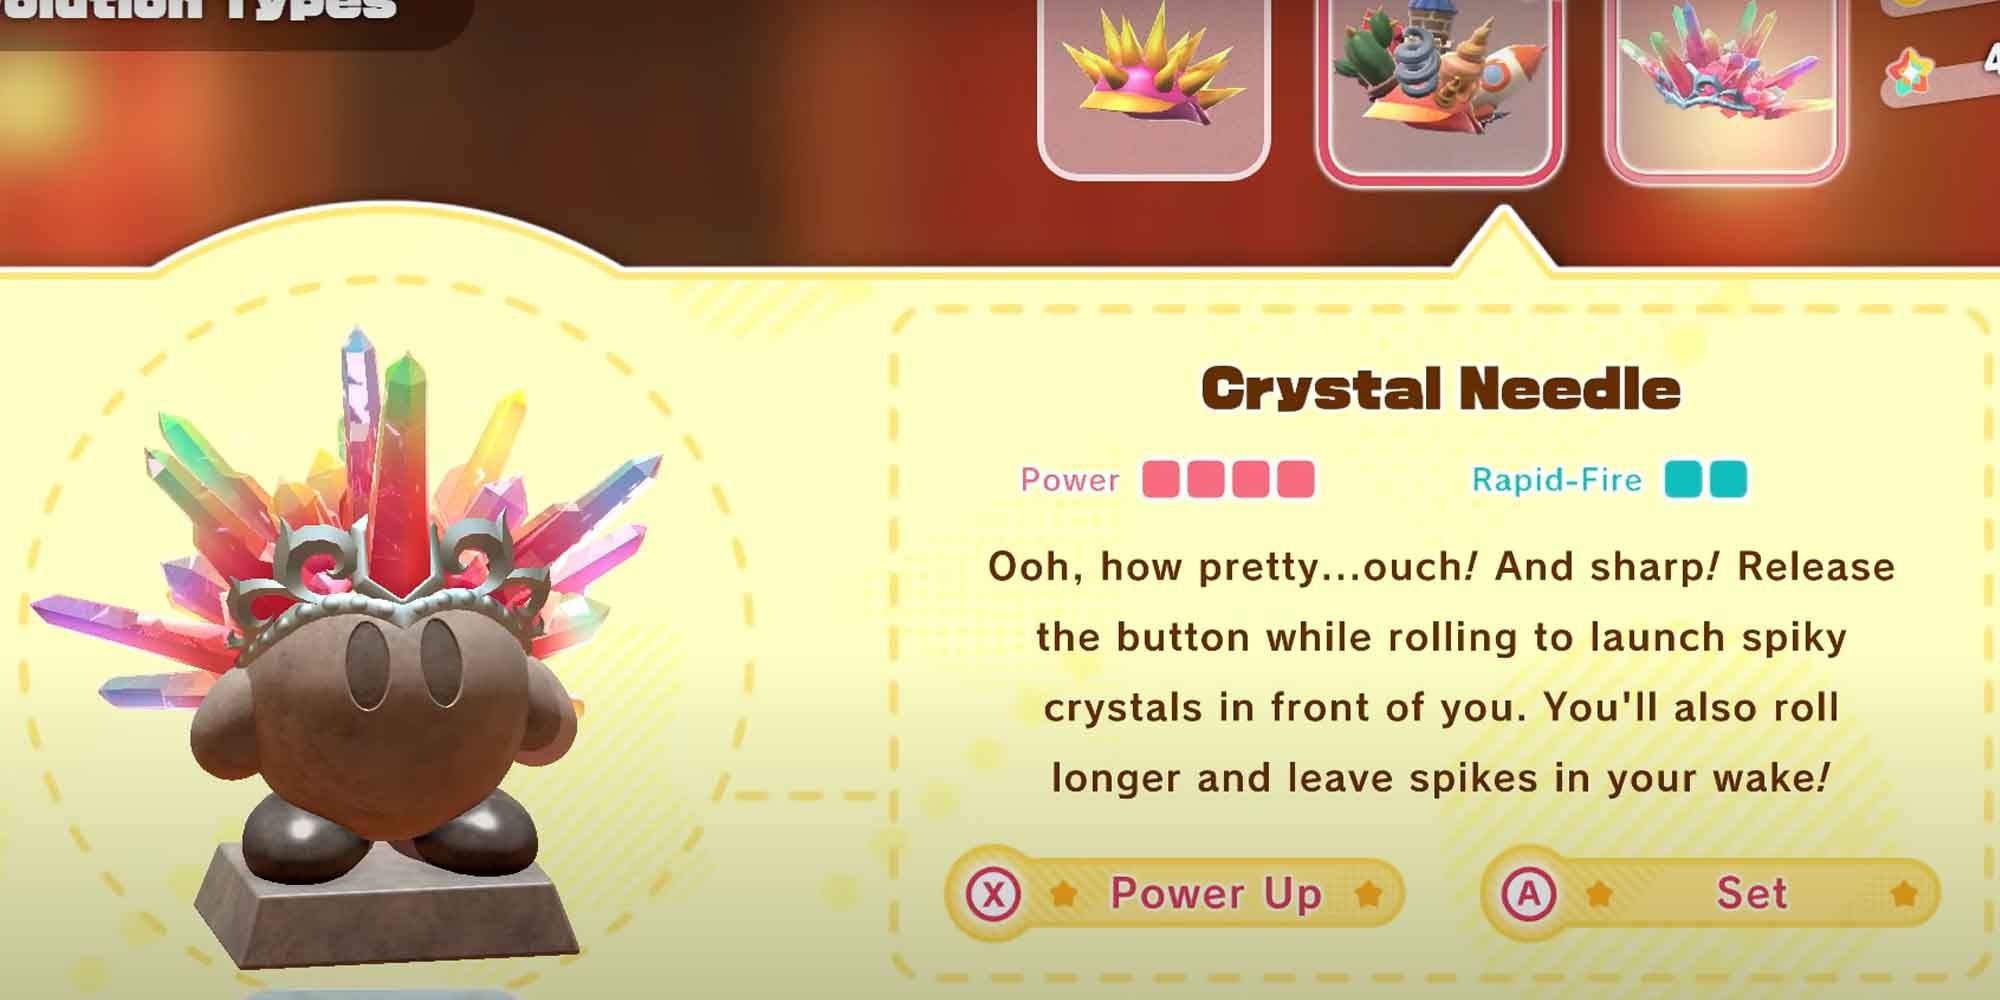 The Crystal Needle upgrade for the Needle copy ability in Kirby and the Forgotten Land